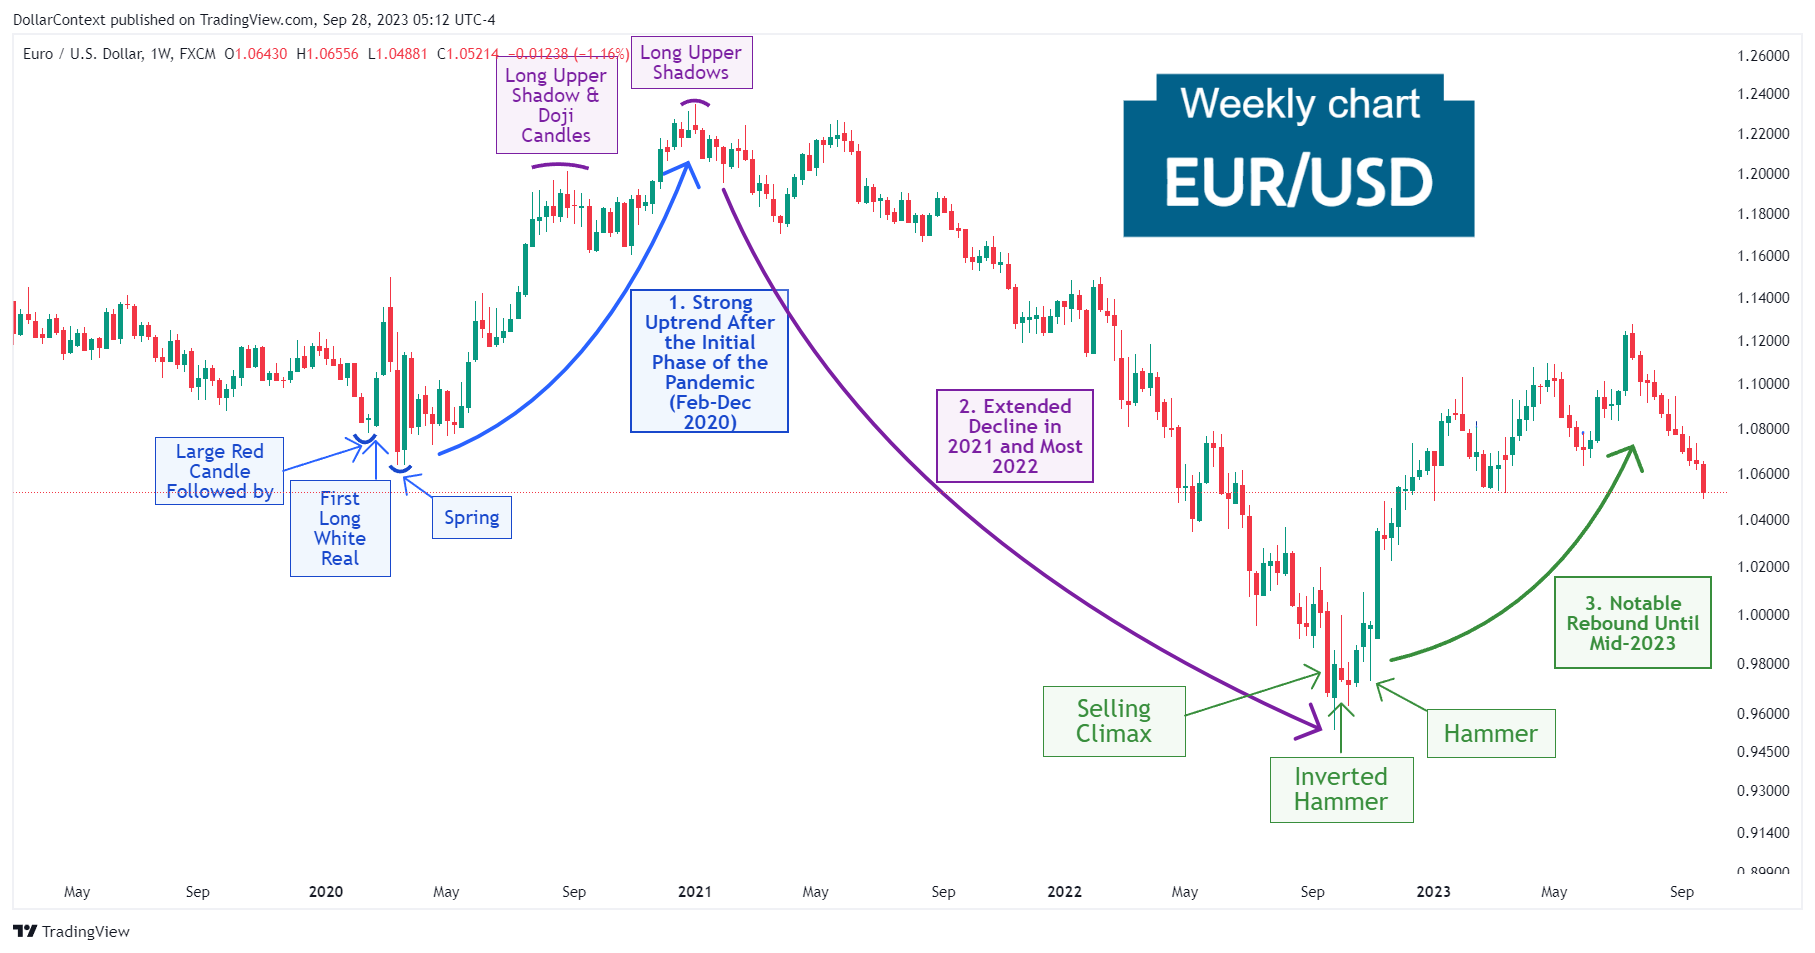 EUR/USD: Notable Rebound in Late 2022 and the First Half of 2023 (Weekly Chart)